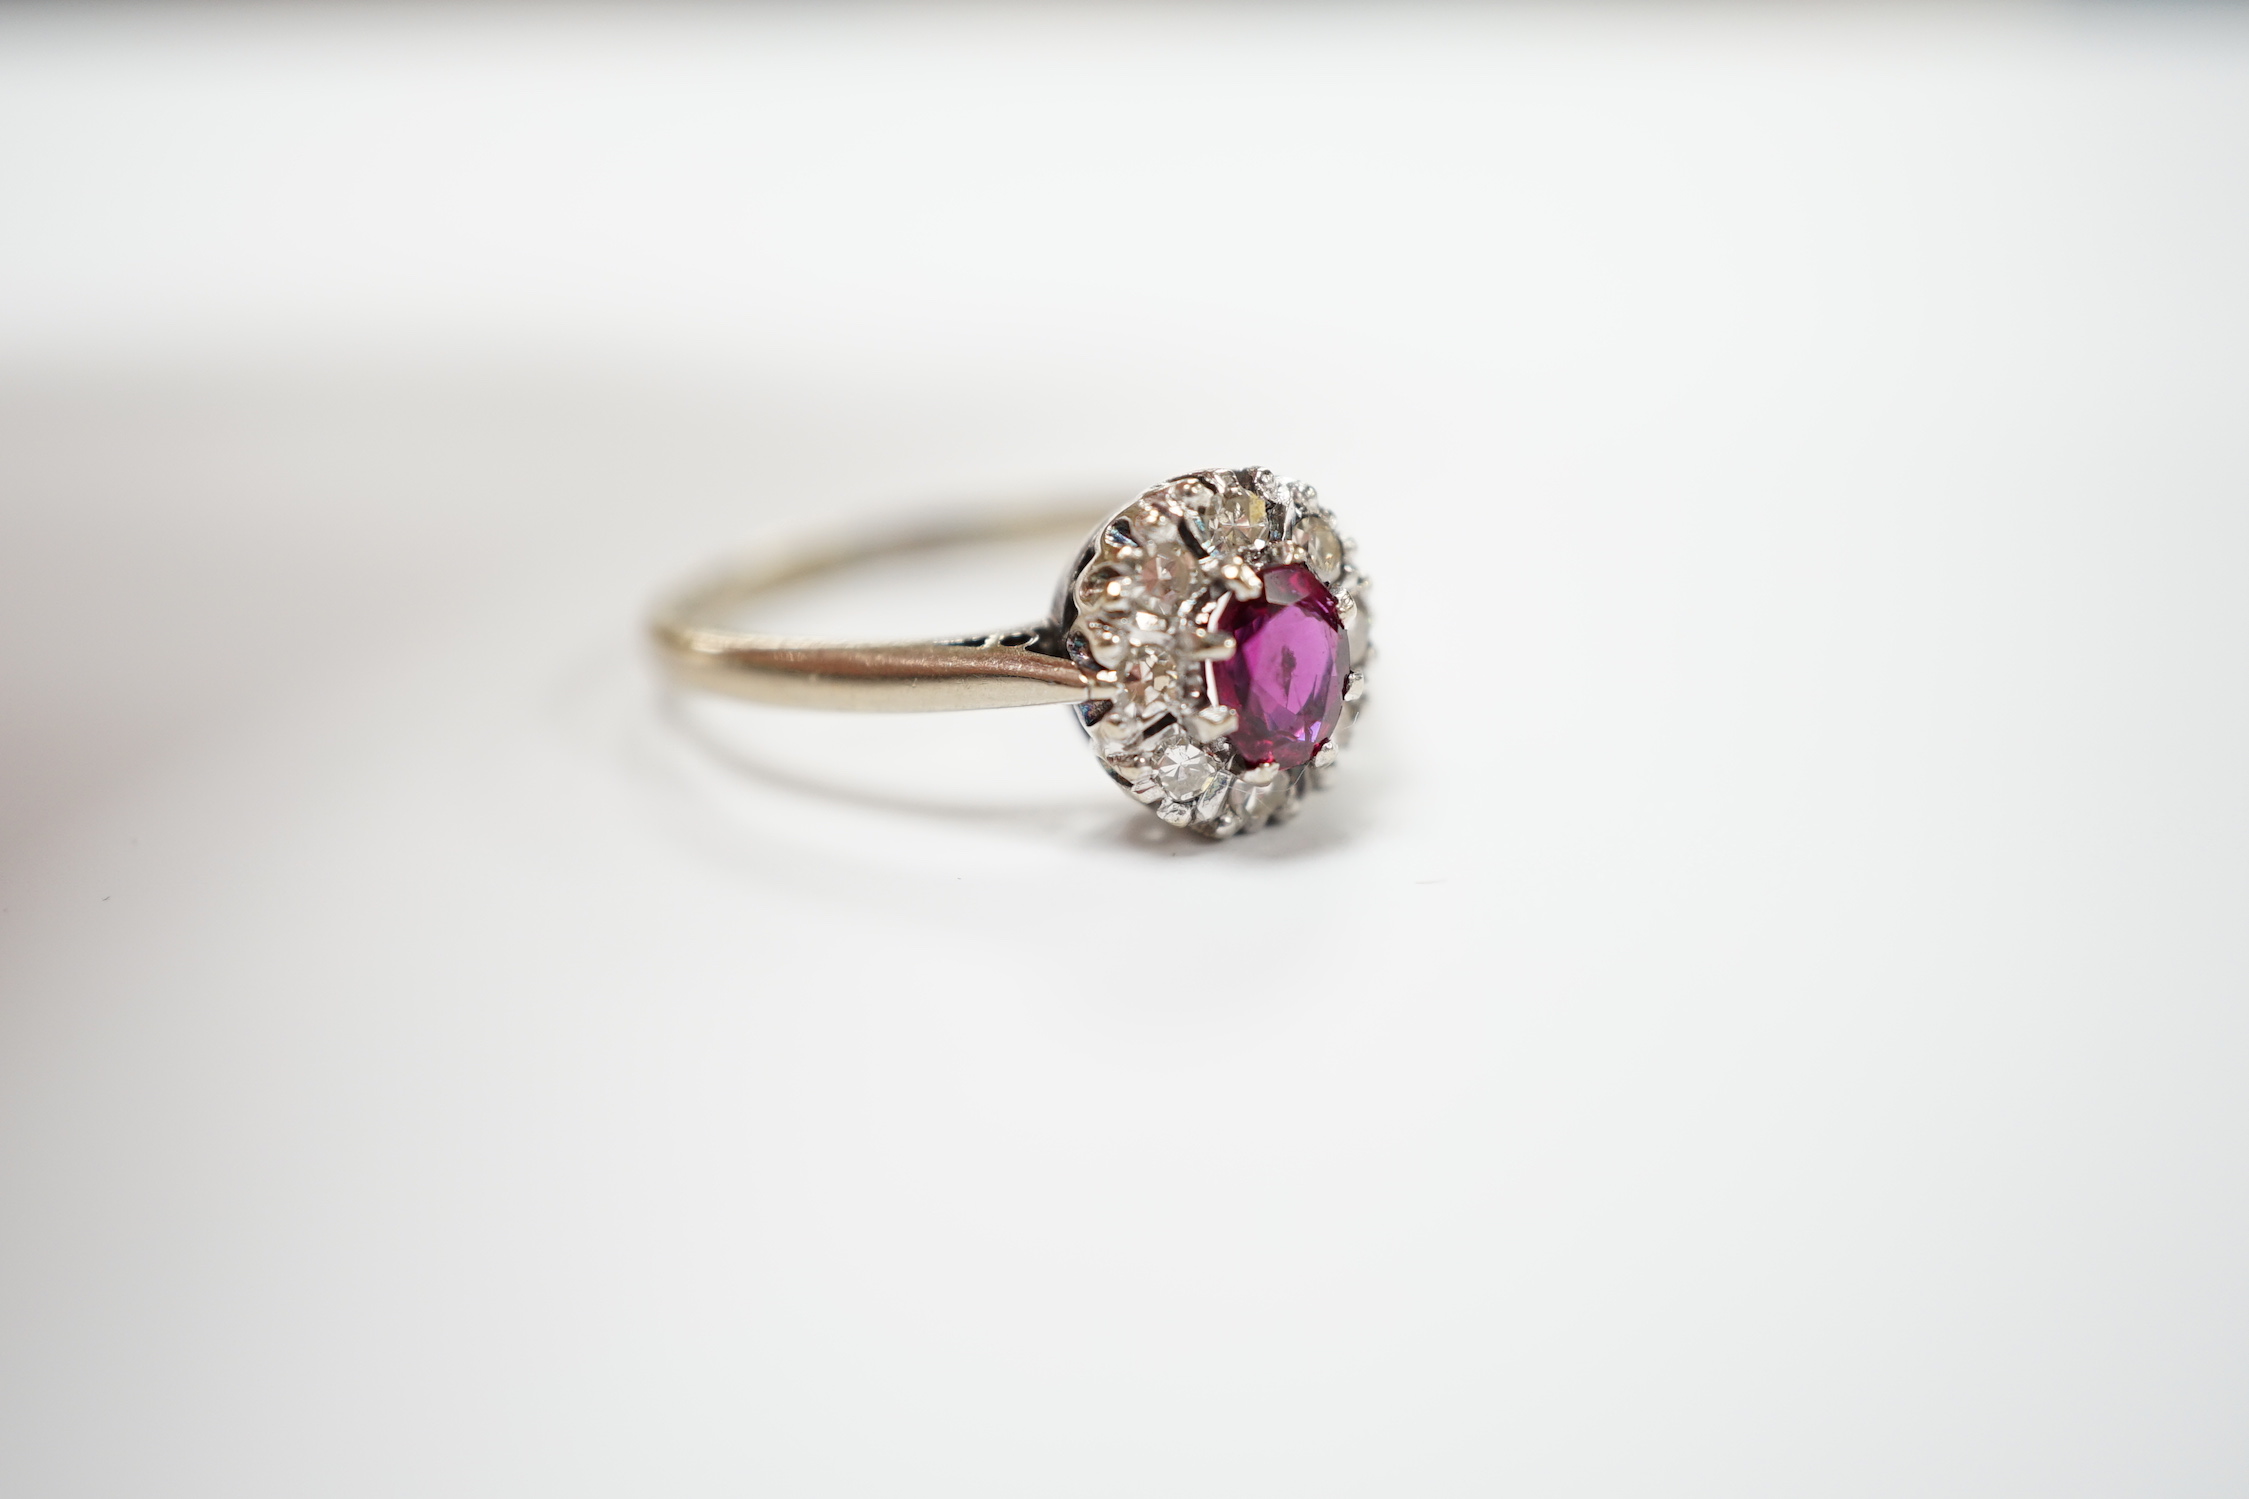 A 18ct white, ruby and diamond set oval cluster ring, size Q/R, gross weight 4.2 grams.